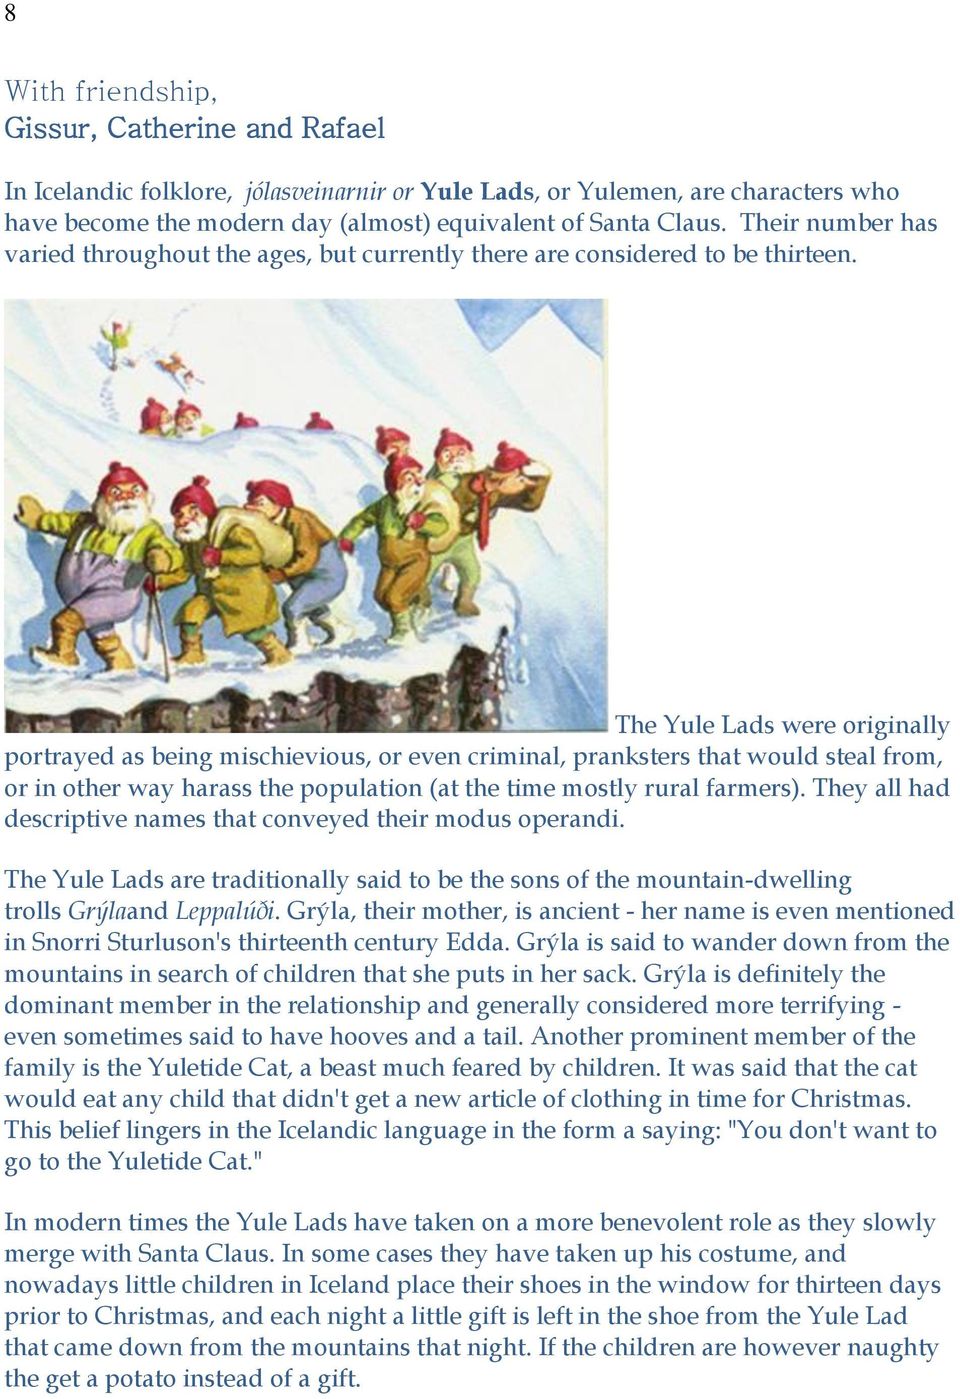 The Yule Lads were originally portrayed as being mischievious, or even criminal, pranksters that would steal from, or in other way harass the population (at the time mostly rural farmers).